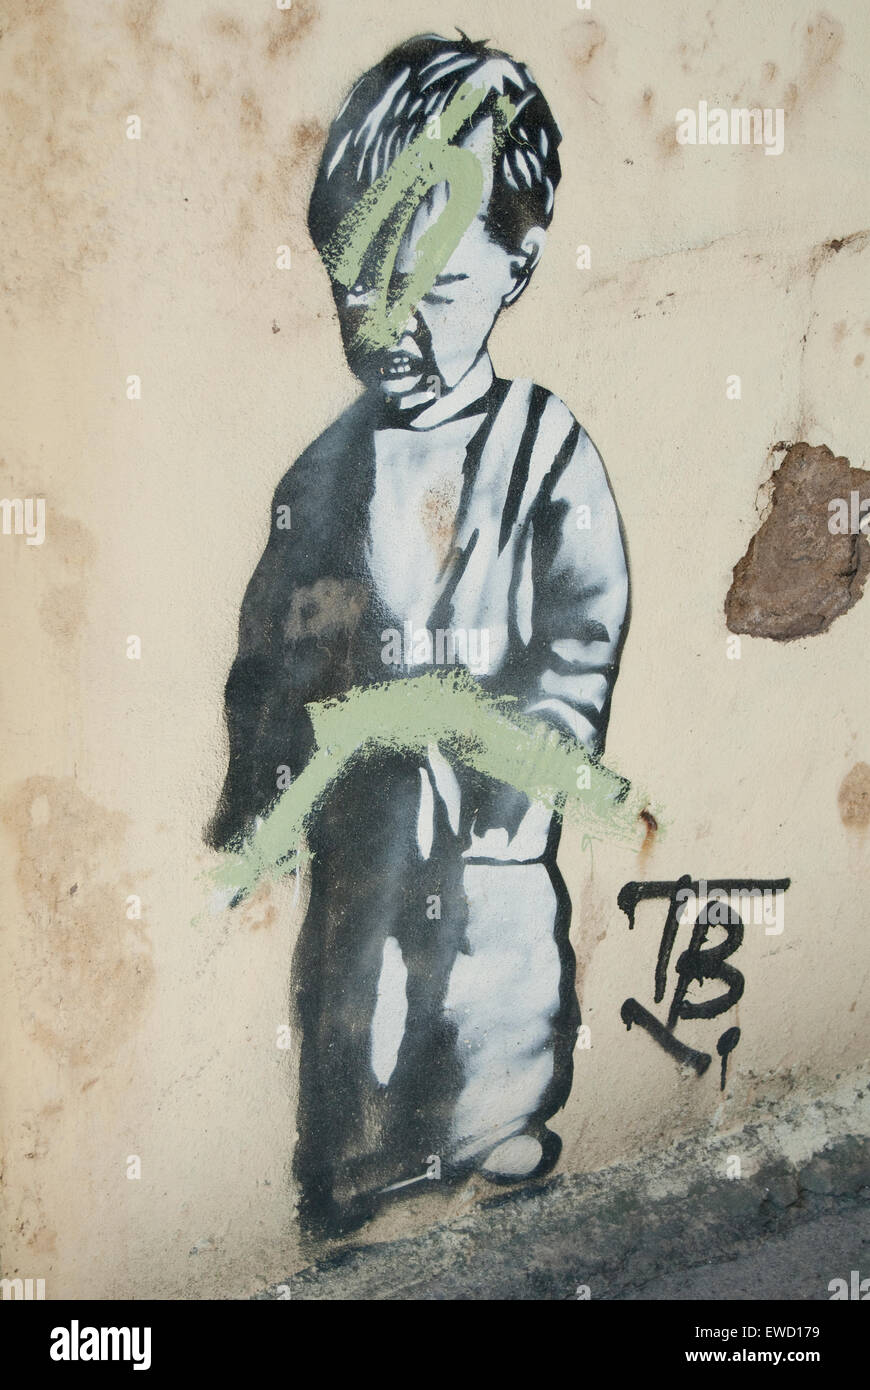 Editorial image of Urban artwork of a small boy possibly by Street artist Banksy, which ironically has been defaced by graffiti. Stock Photo